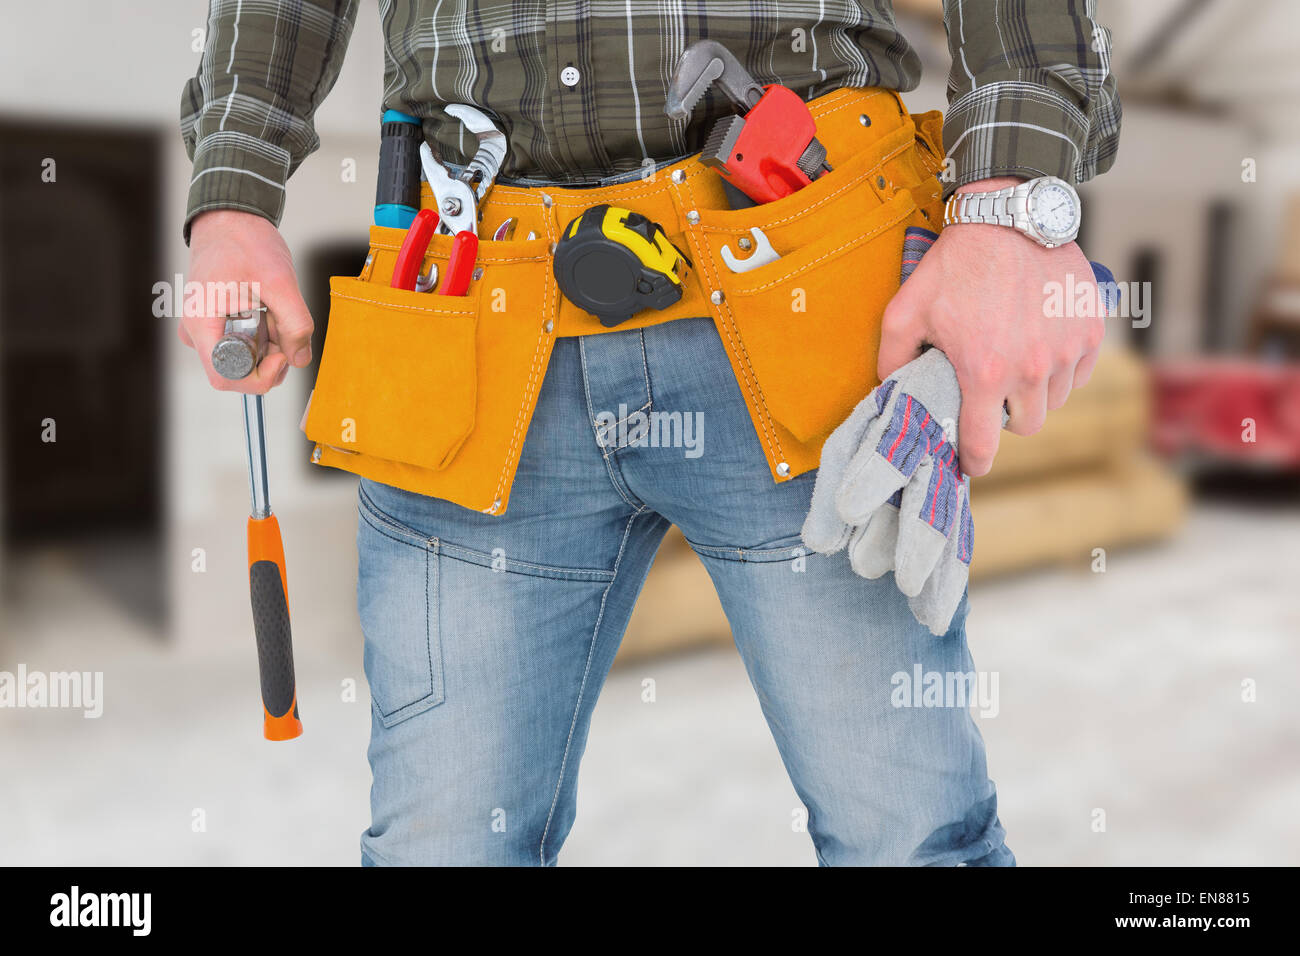 Composite image of manual worker holding gloves and hammer Stock Photo